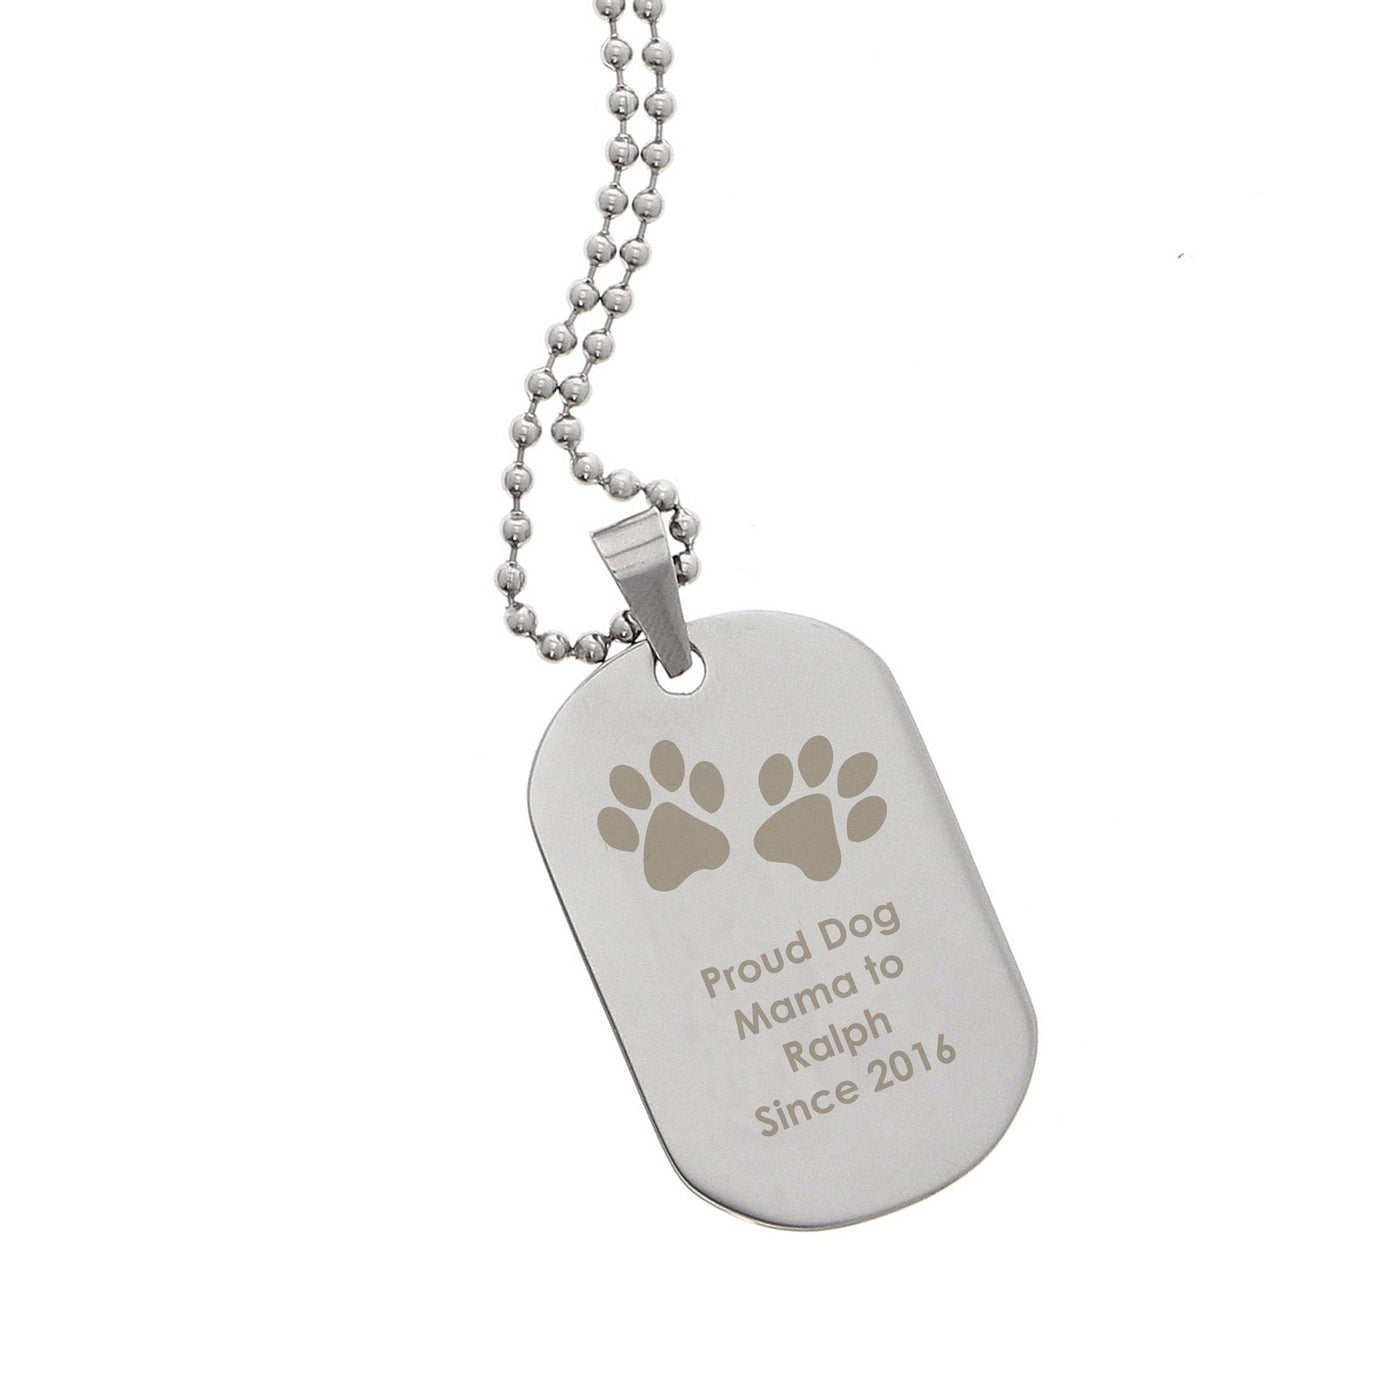 Personalised Pawprints Stainless Steel Dog Tag Necklace - Shop Personalised Gifts